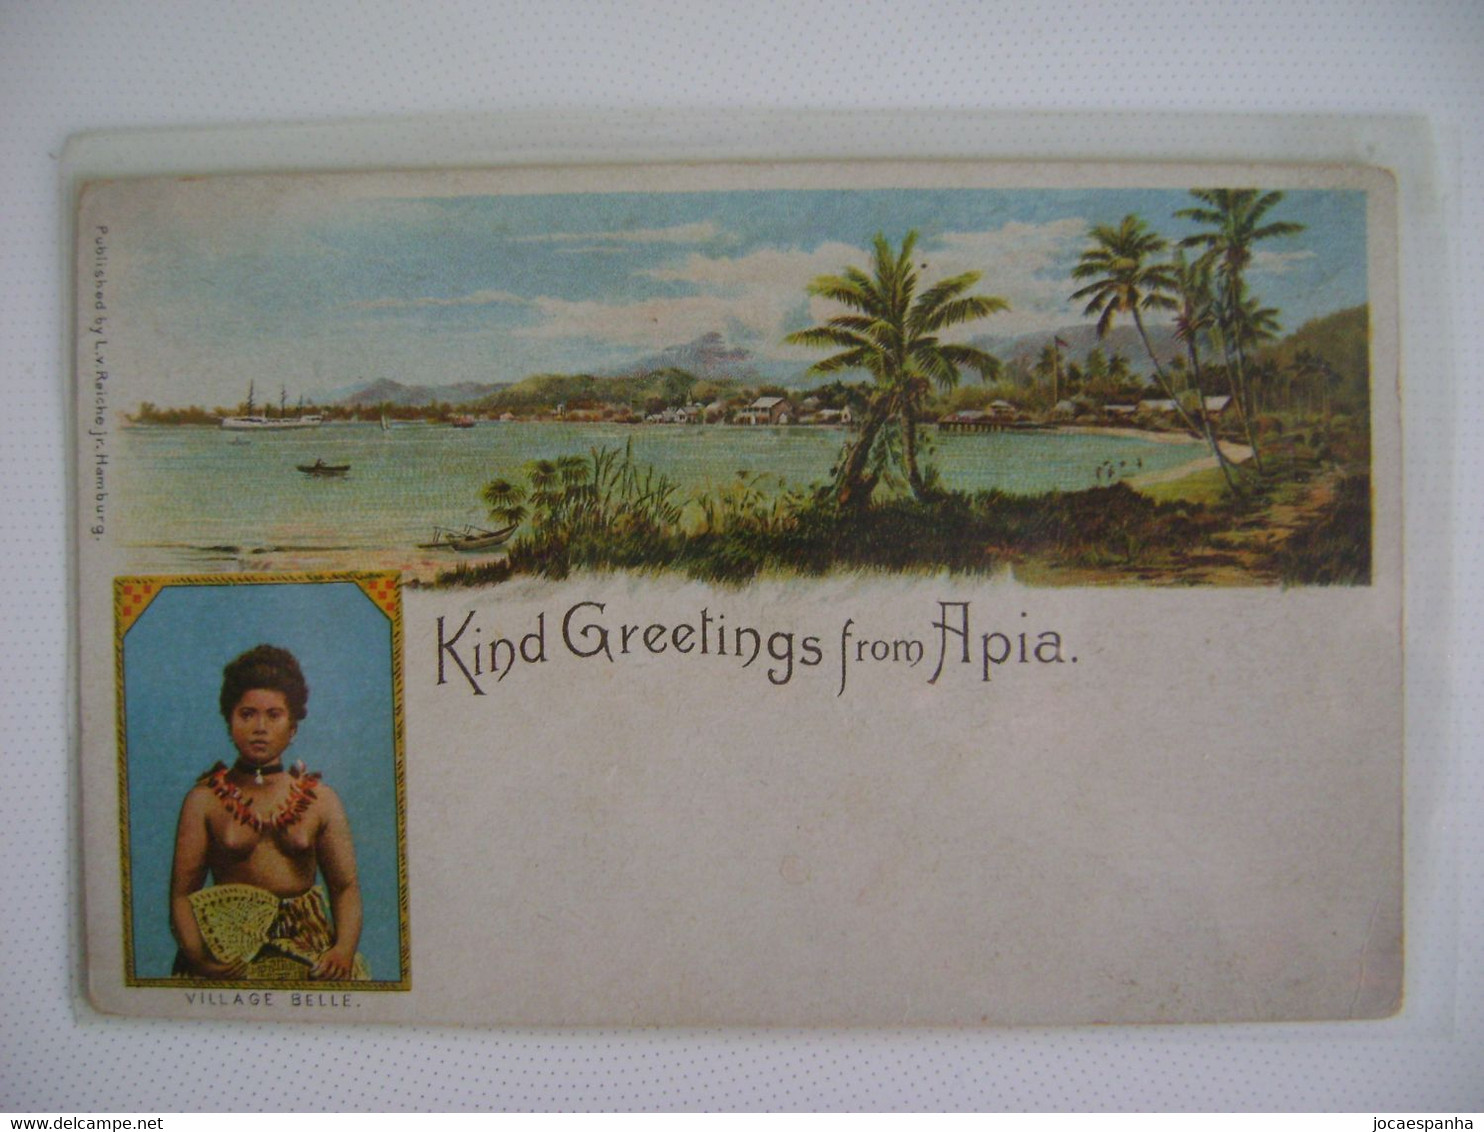 POSTCARD "KIND GREETINGS FROM APIA" IN THE STATE - Samoa